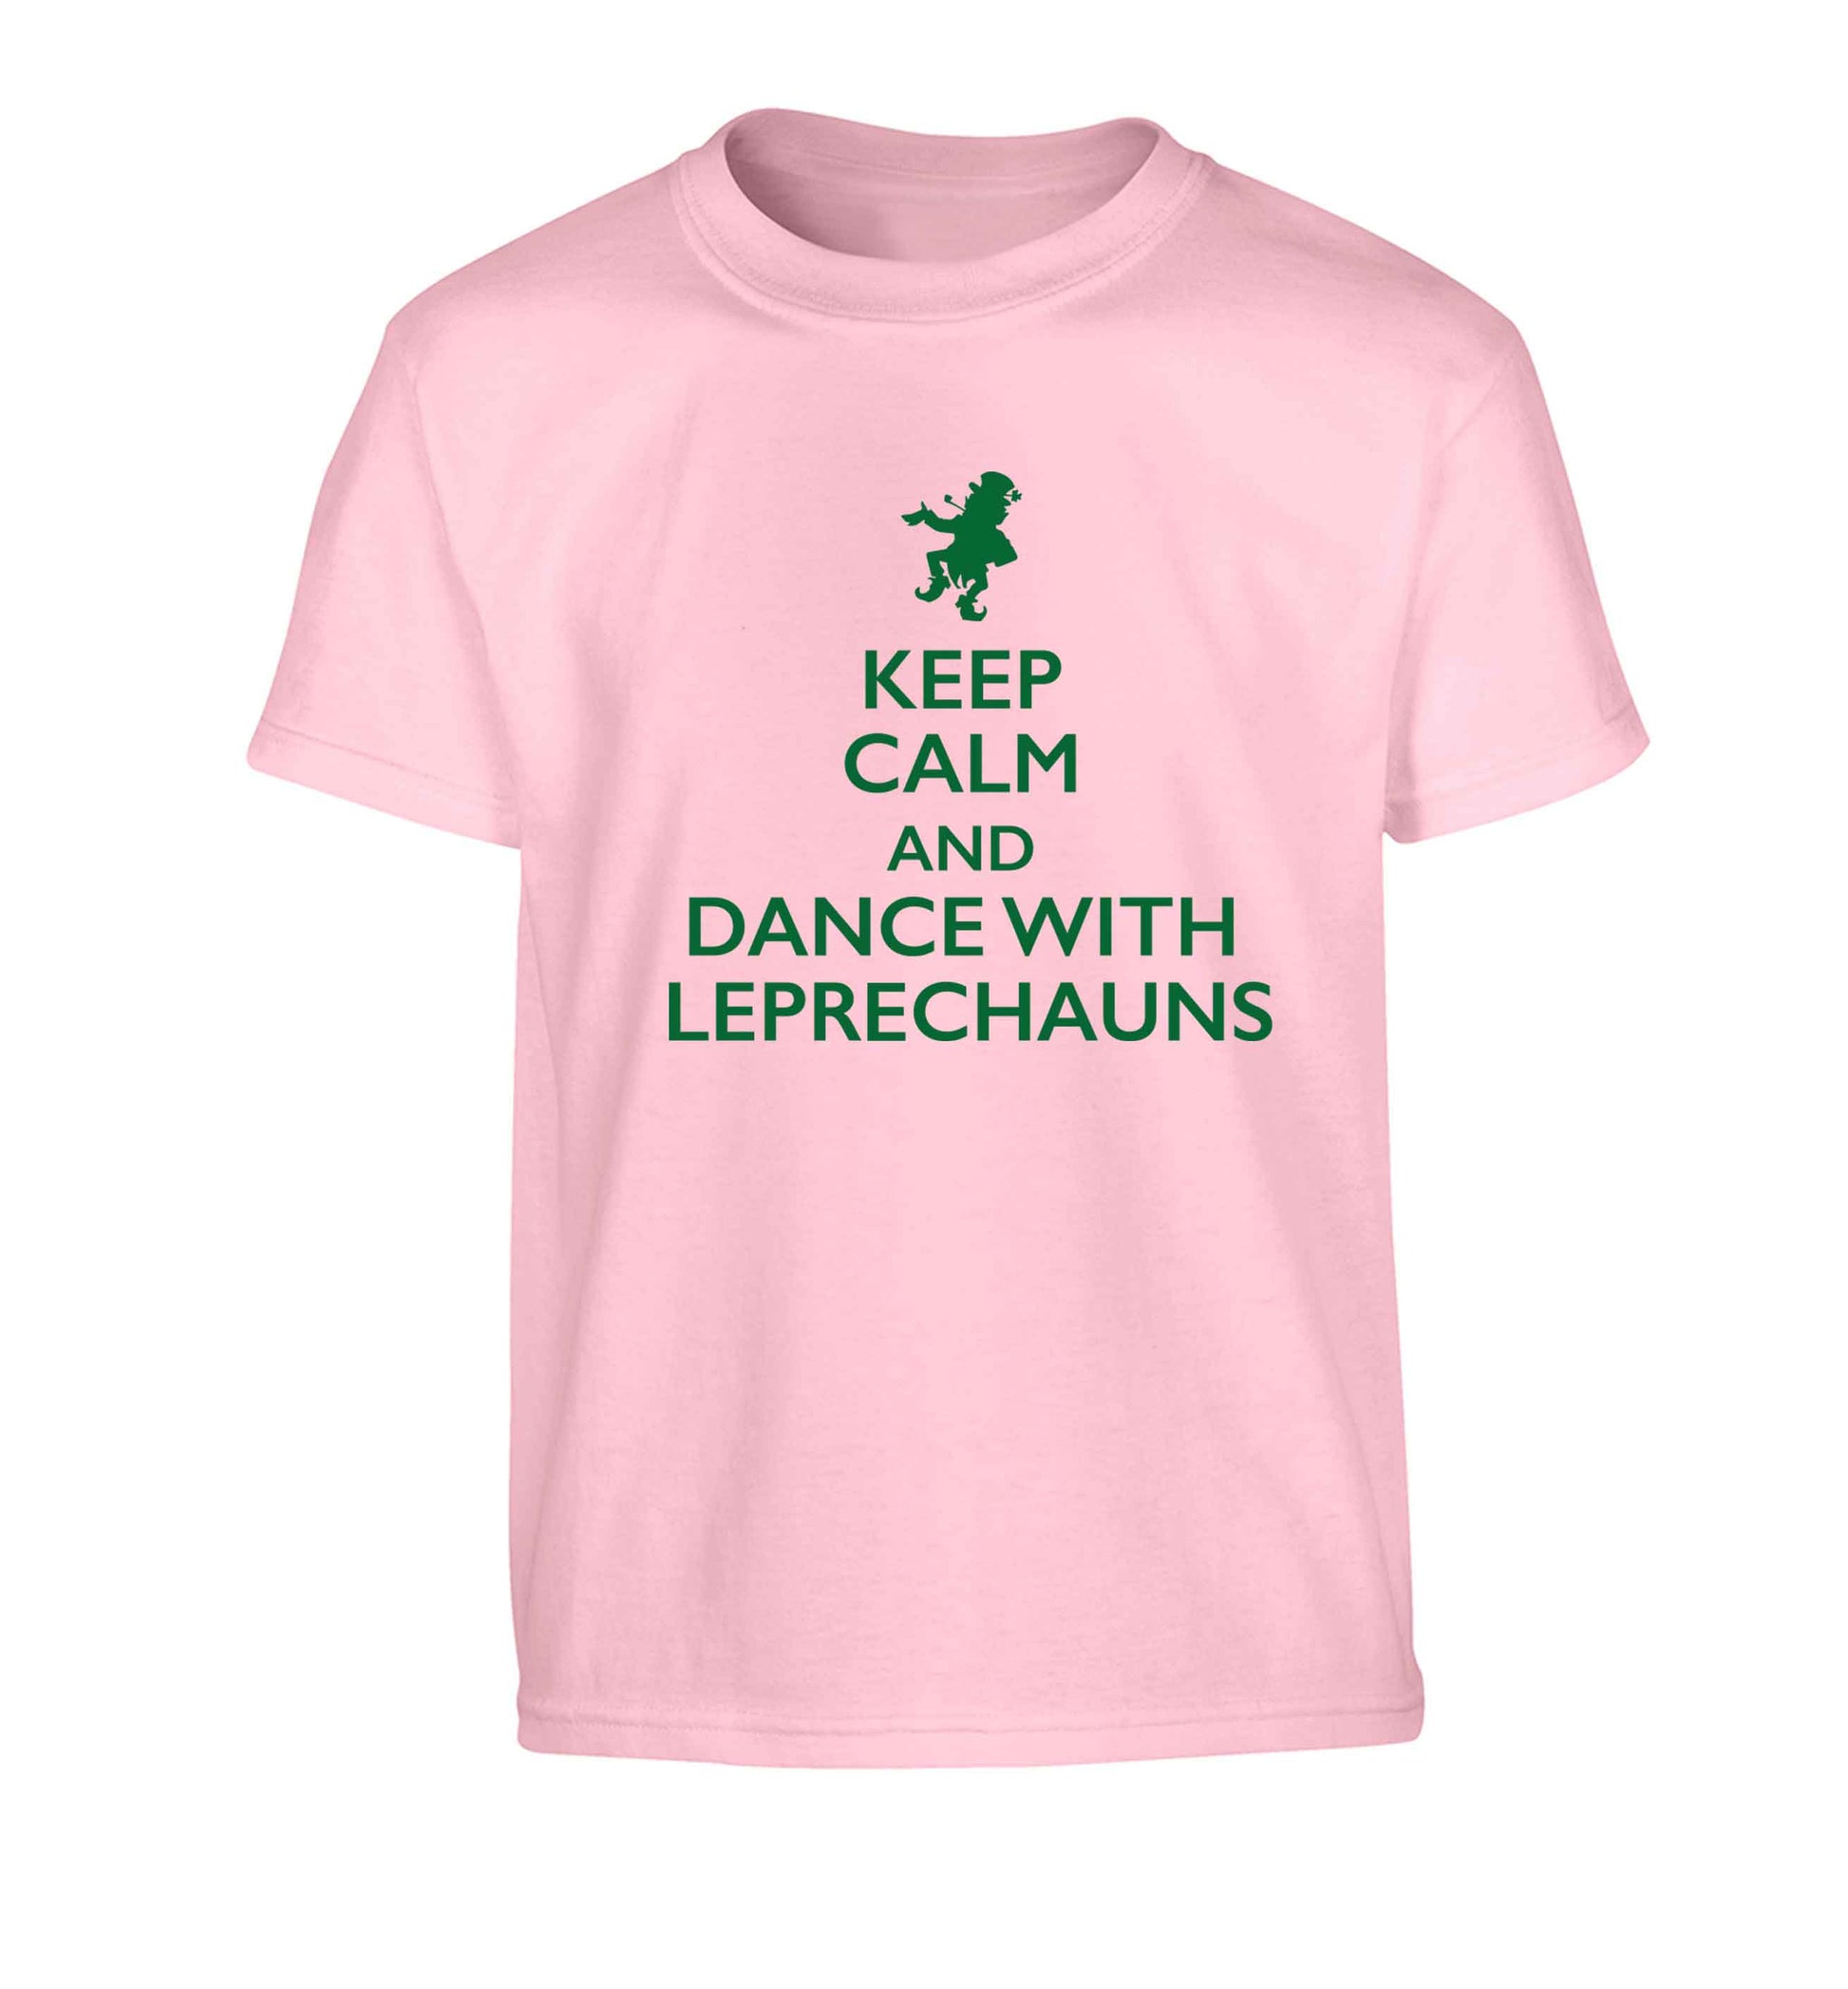 Keep calm and dance with leprechauns Children's light pink Tshirt 12-13 Years